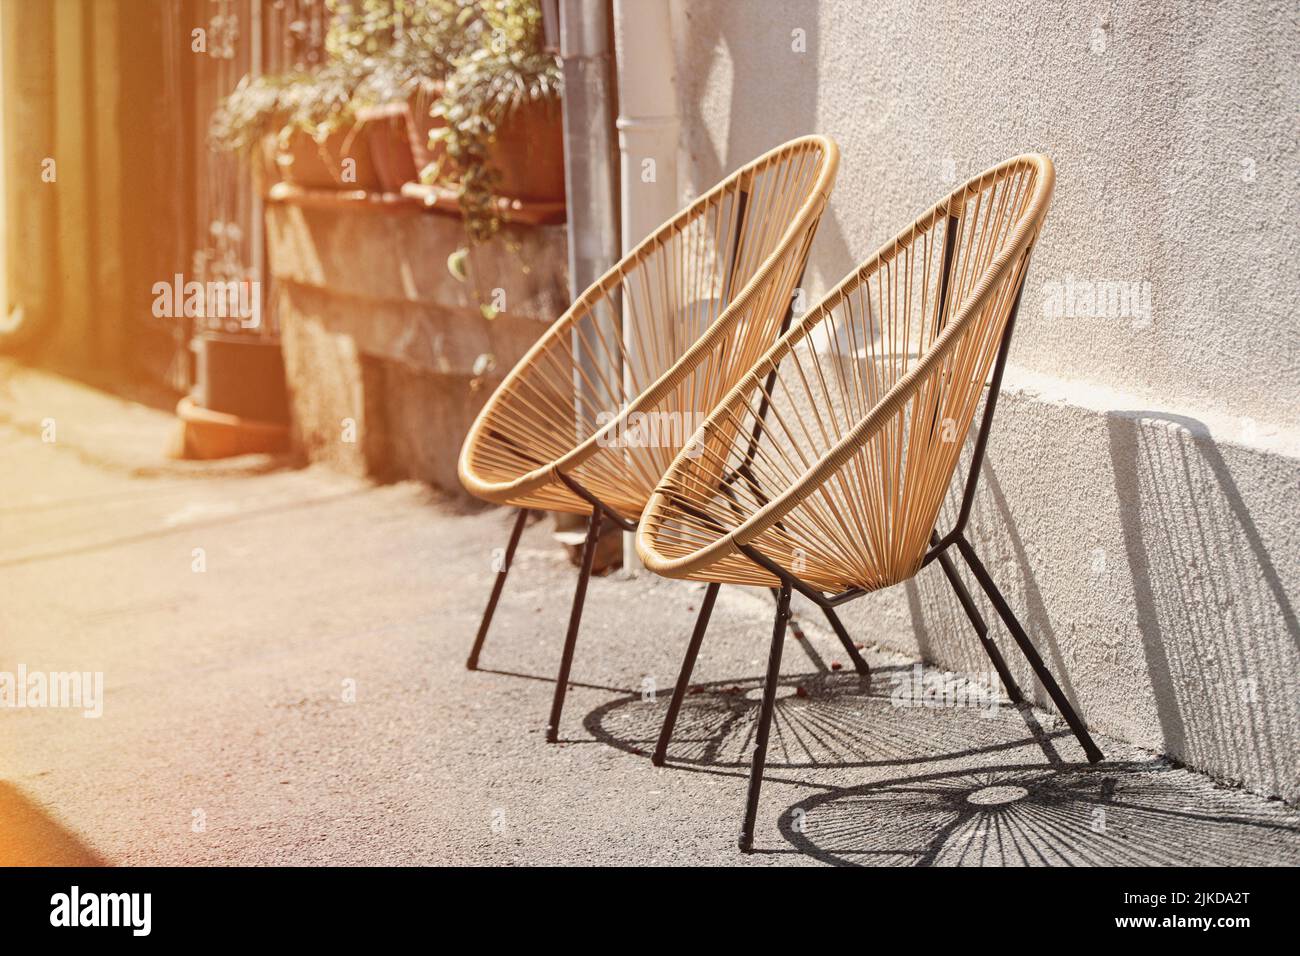 Rattan Wicker Chair. Wicker Armchairs Stand Outside. Modern Furniture At Street. Cafe Furniture. Trendy Designer Chairs. Fashion Designer Armchairs. Stock Photo